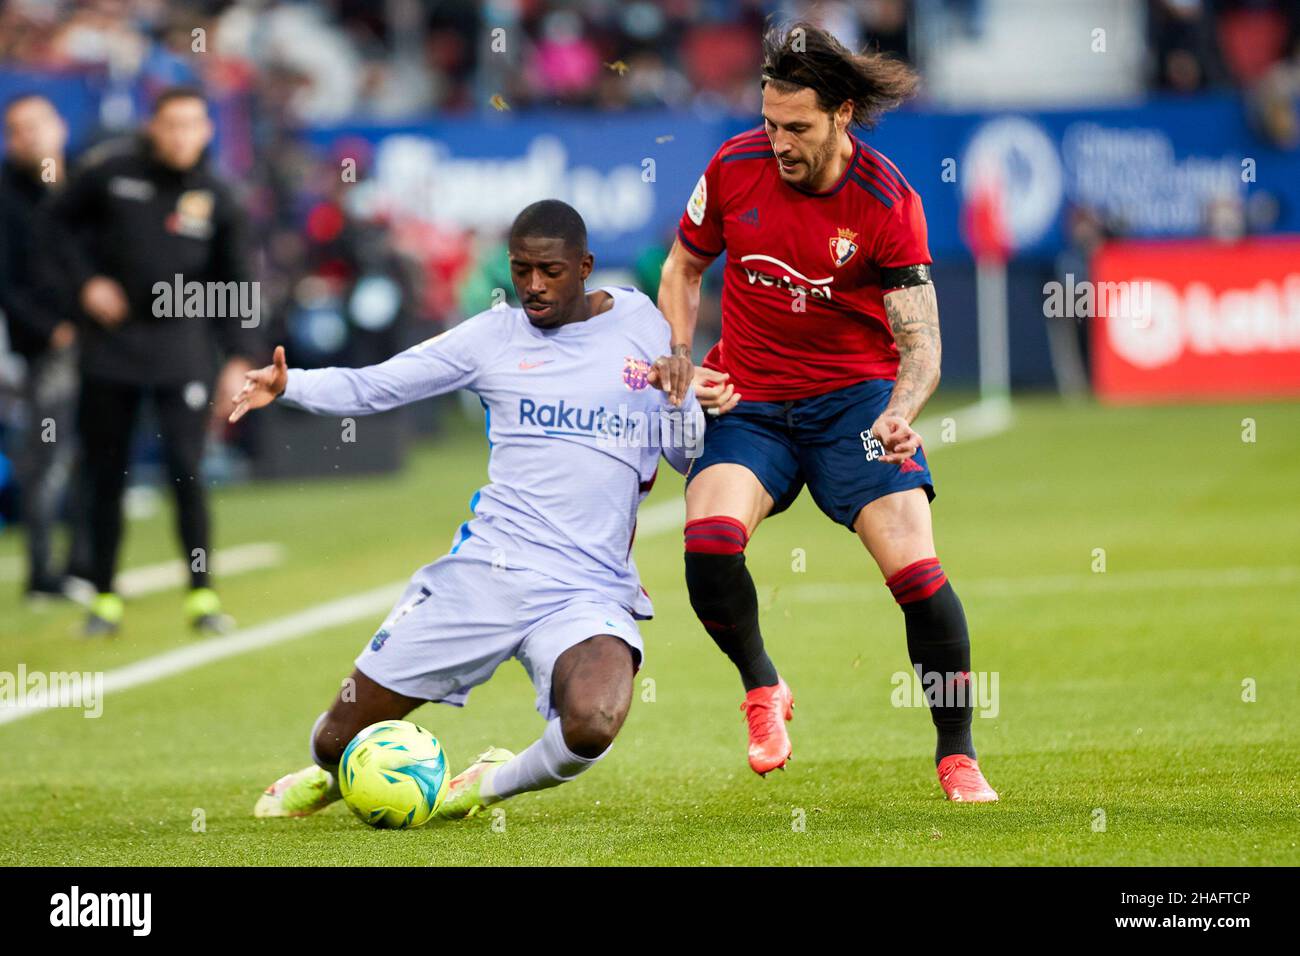 Pamplona, Spain. 12th Dec, 2021. Ousmane Dembelé (L), forward of FC Barcelona, and Juan Cruz (R), defender of CA Osasuna are seen in action during the Spanish football of La Liga Santander, the match between CA Osasuna and FC Barcelona at the Sadar stadium in Pamplona.(Final score; CA Osasuna 2:2 FC Barcelona) Credit: SOPA Images Limited/Alamy Live News Stock Photo